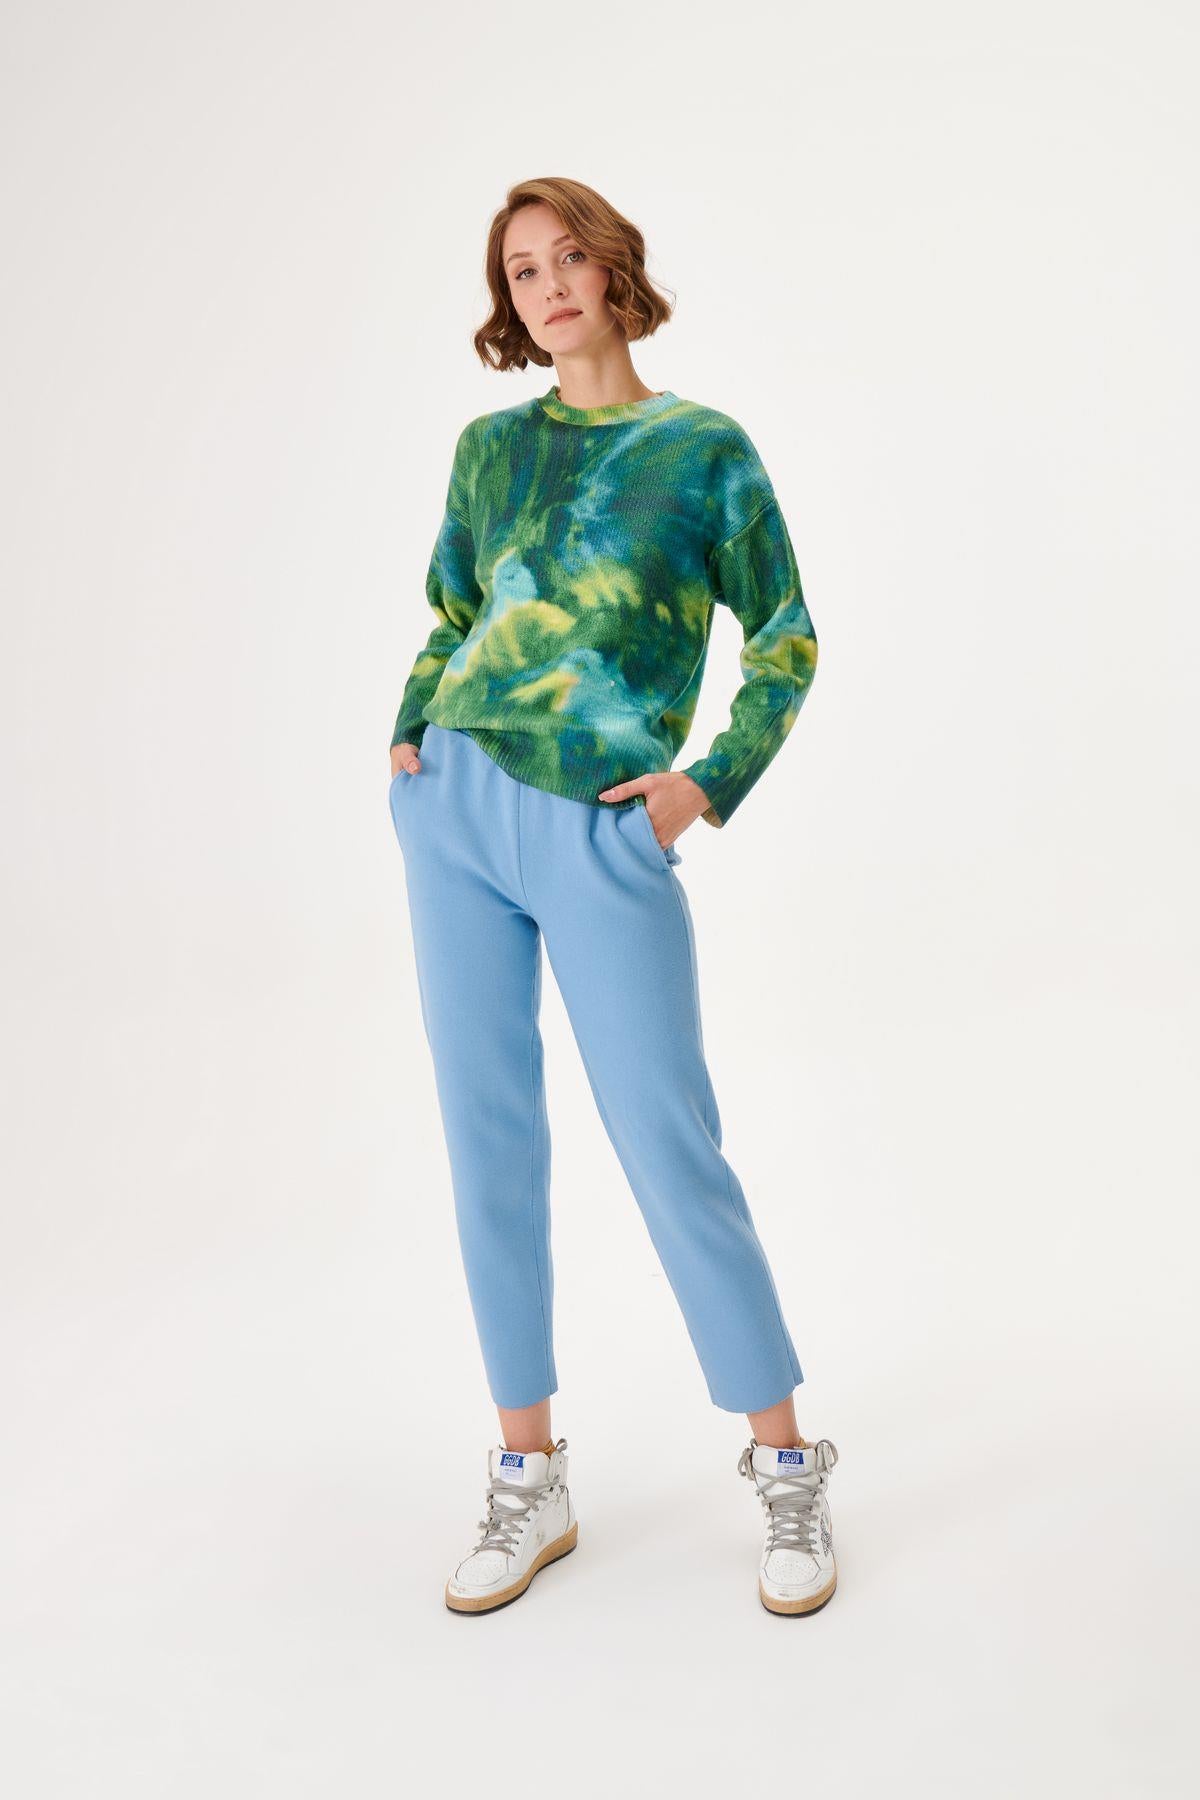 Knitwear Sweater with Green Blue Patterned Digital Printing